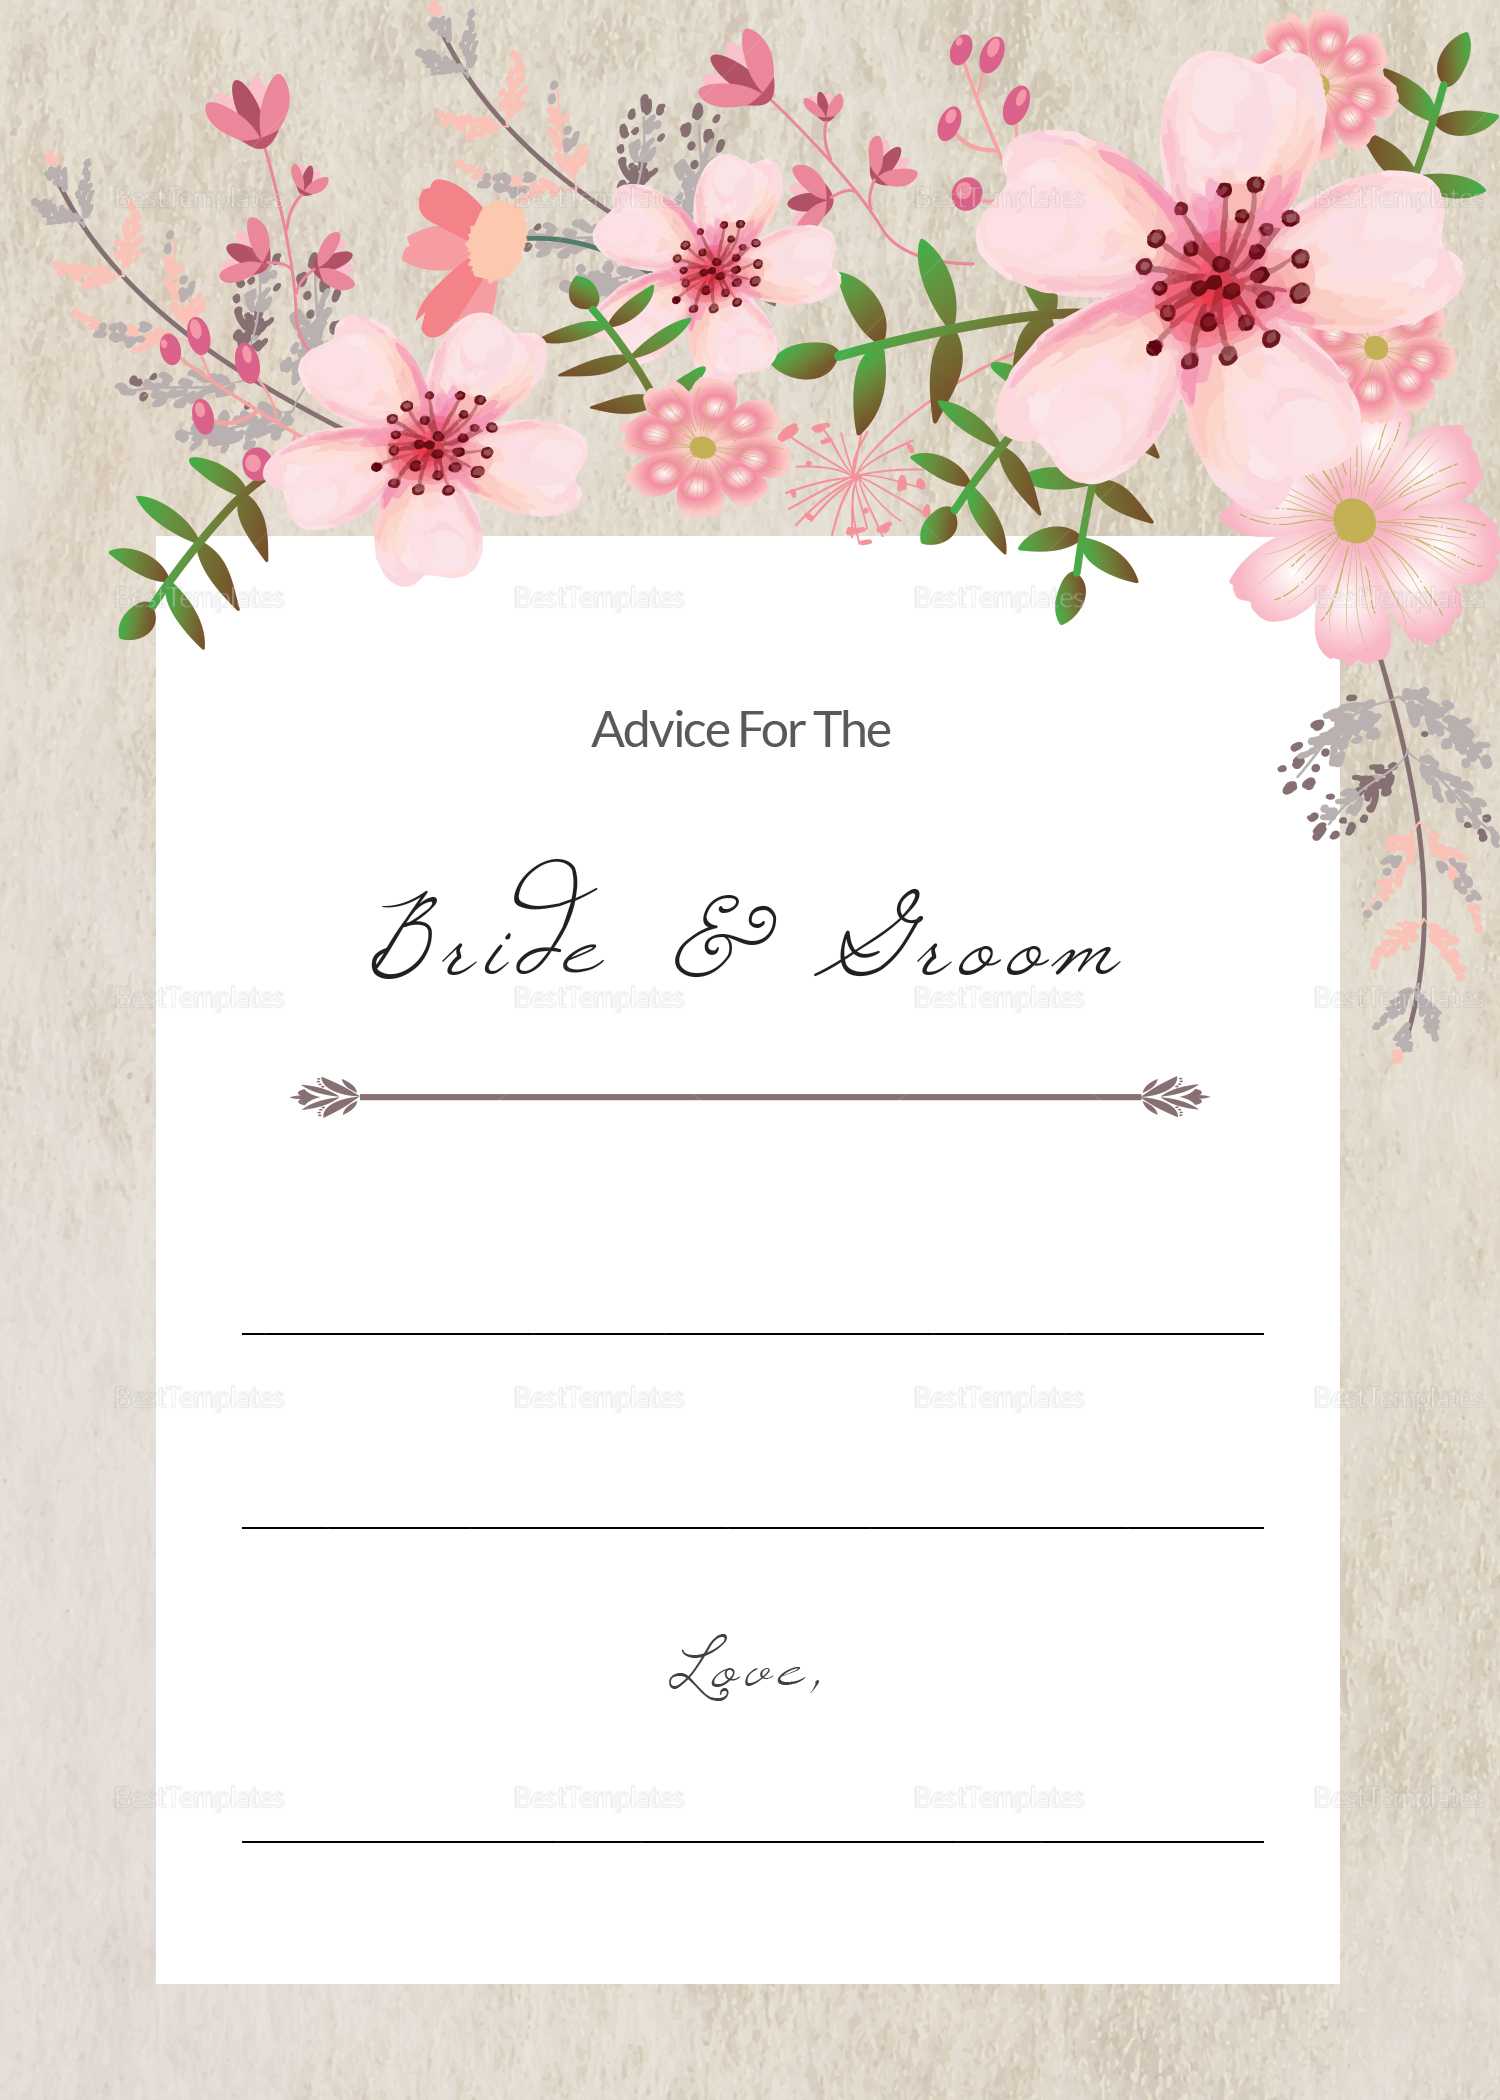 Pink Floral Wedding Advice Card Template Within Marriage Advice Cards Templates